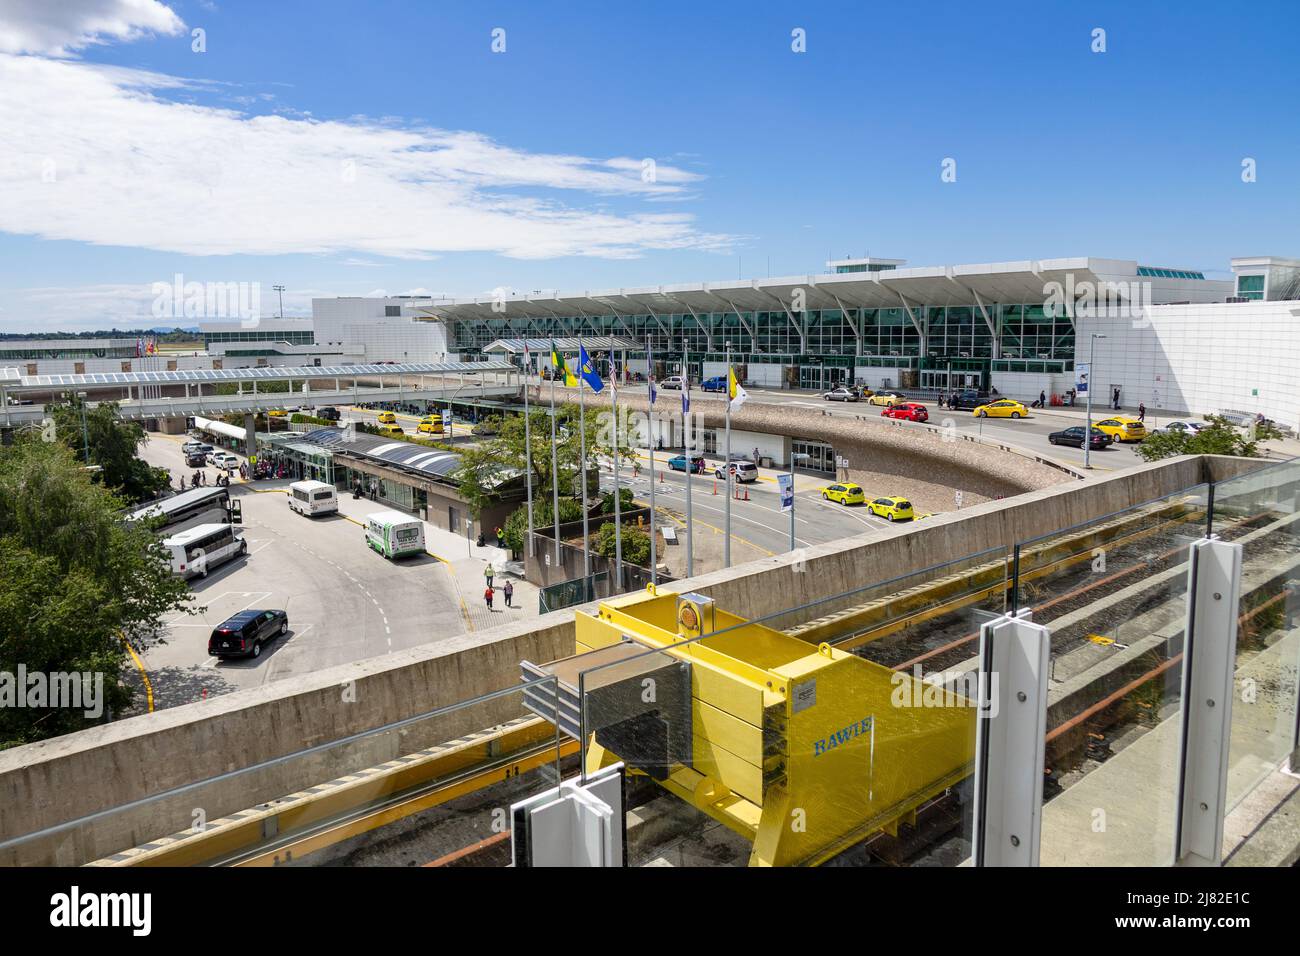 Vancouver International Airport Building Exterior Seen From The Light Rail Station Stock Photo